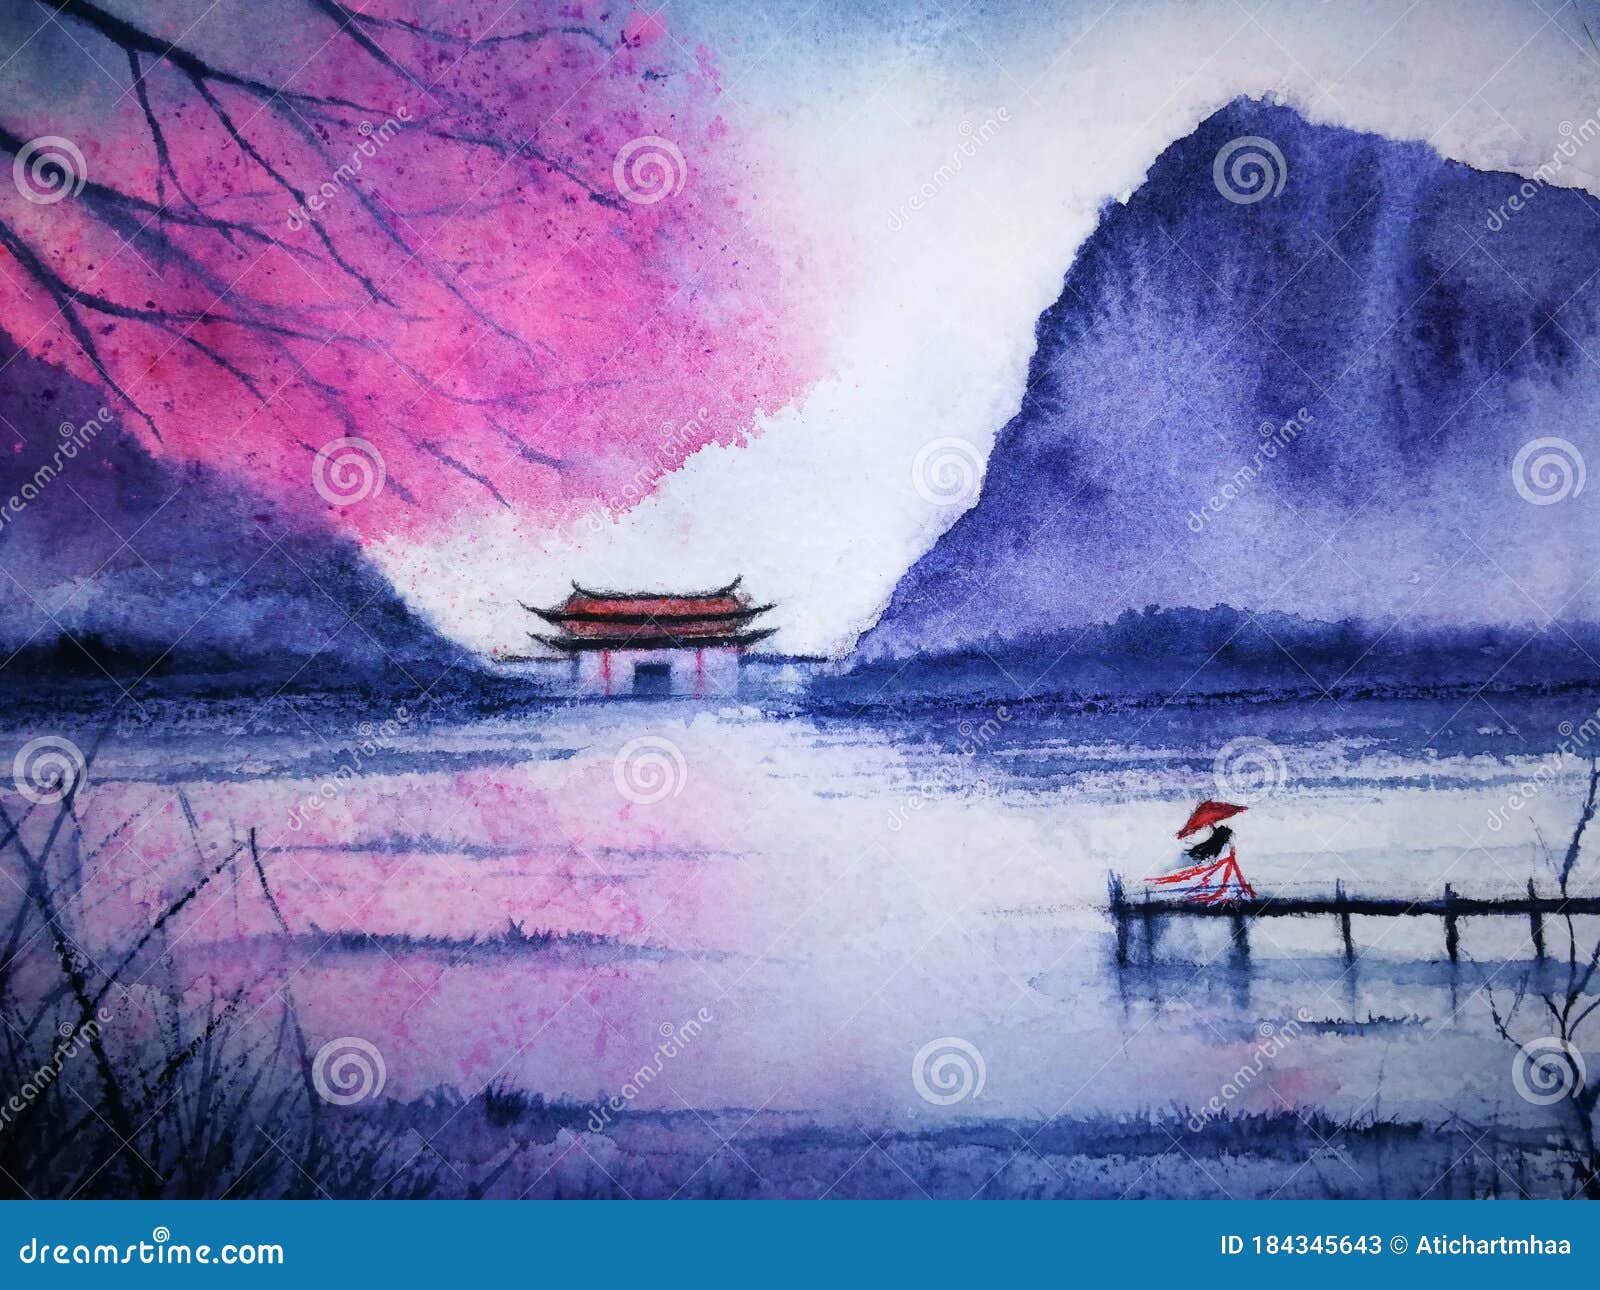 Lonely Boat Leaves Flowers Lake Painting